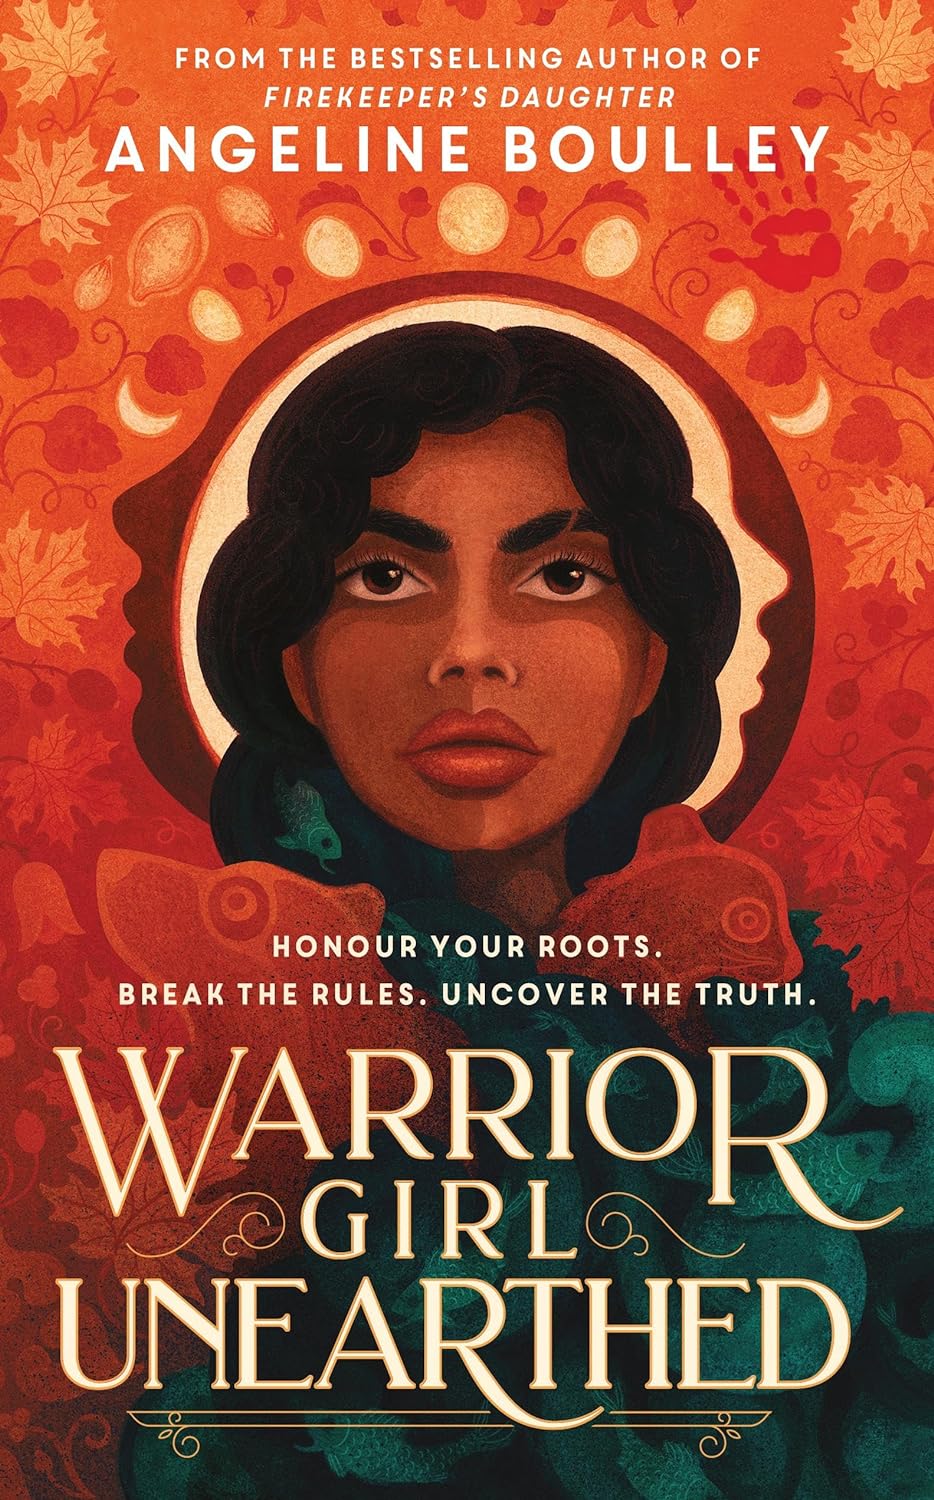 Cover of "Warrior Girl Unearthed" by Angeline Boulley